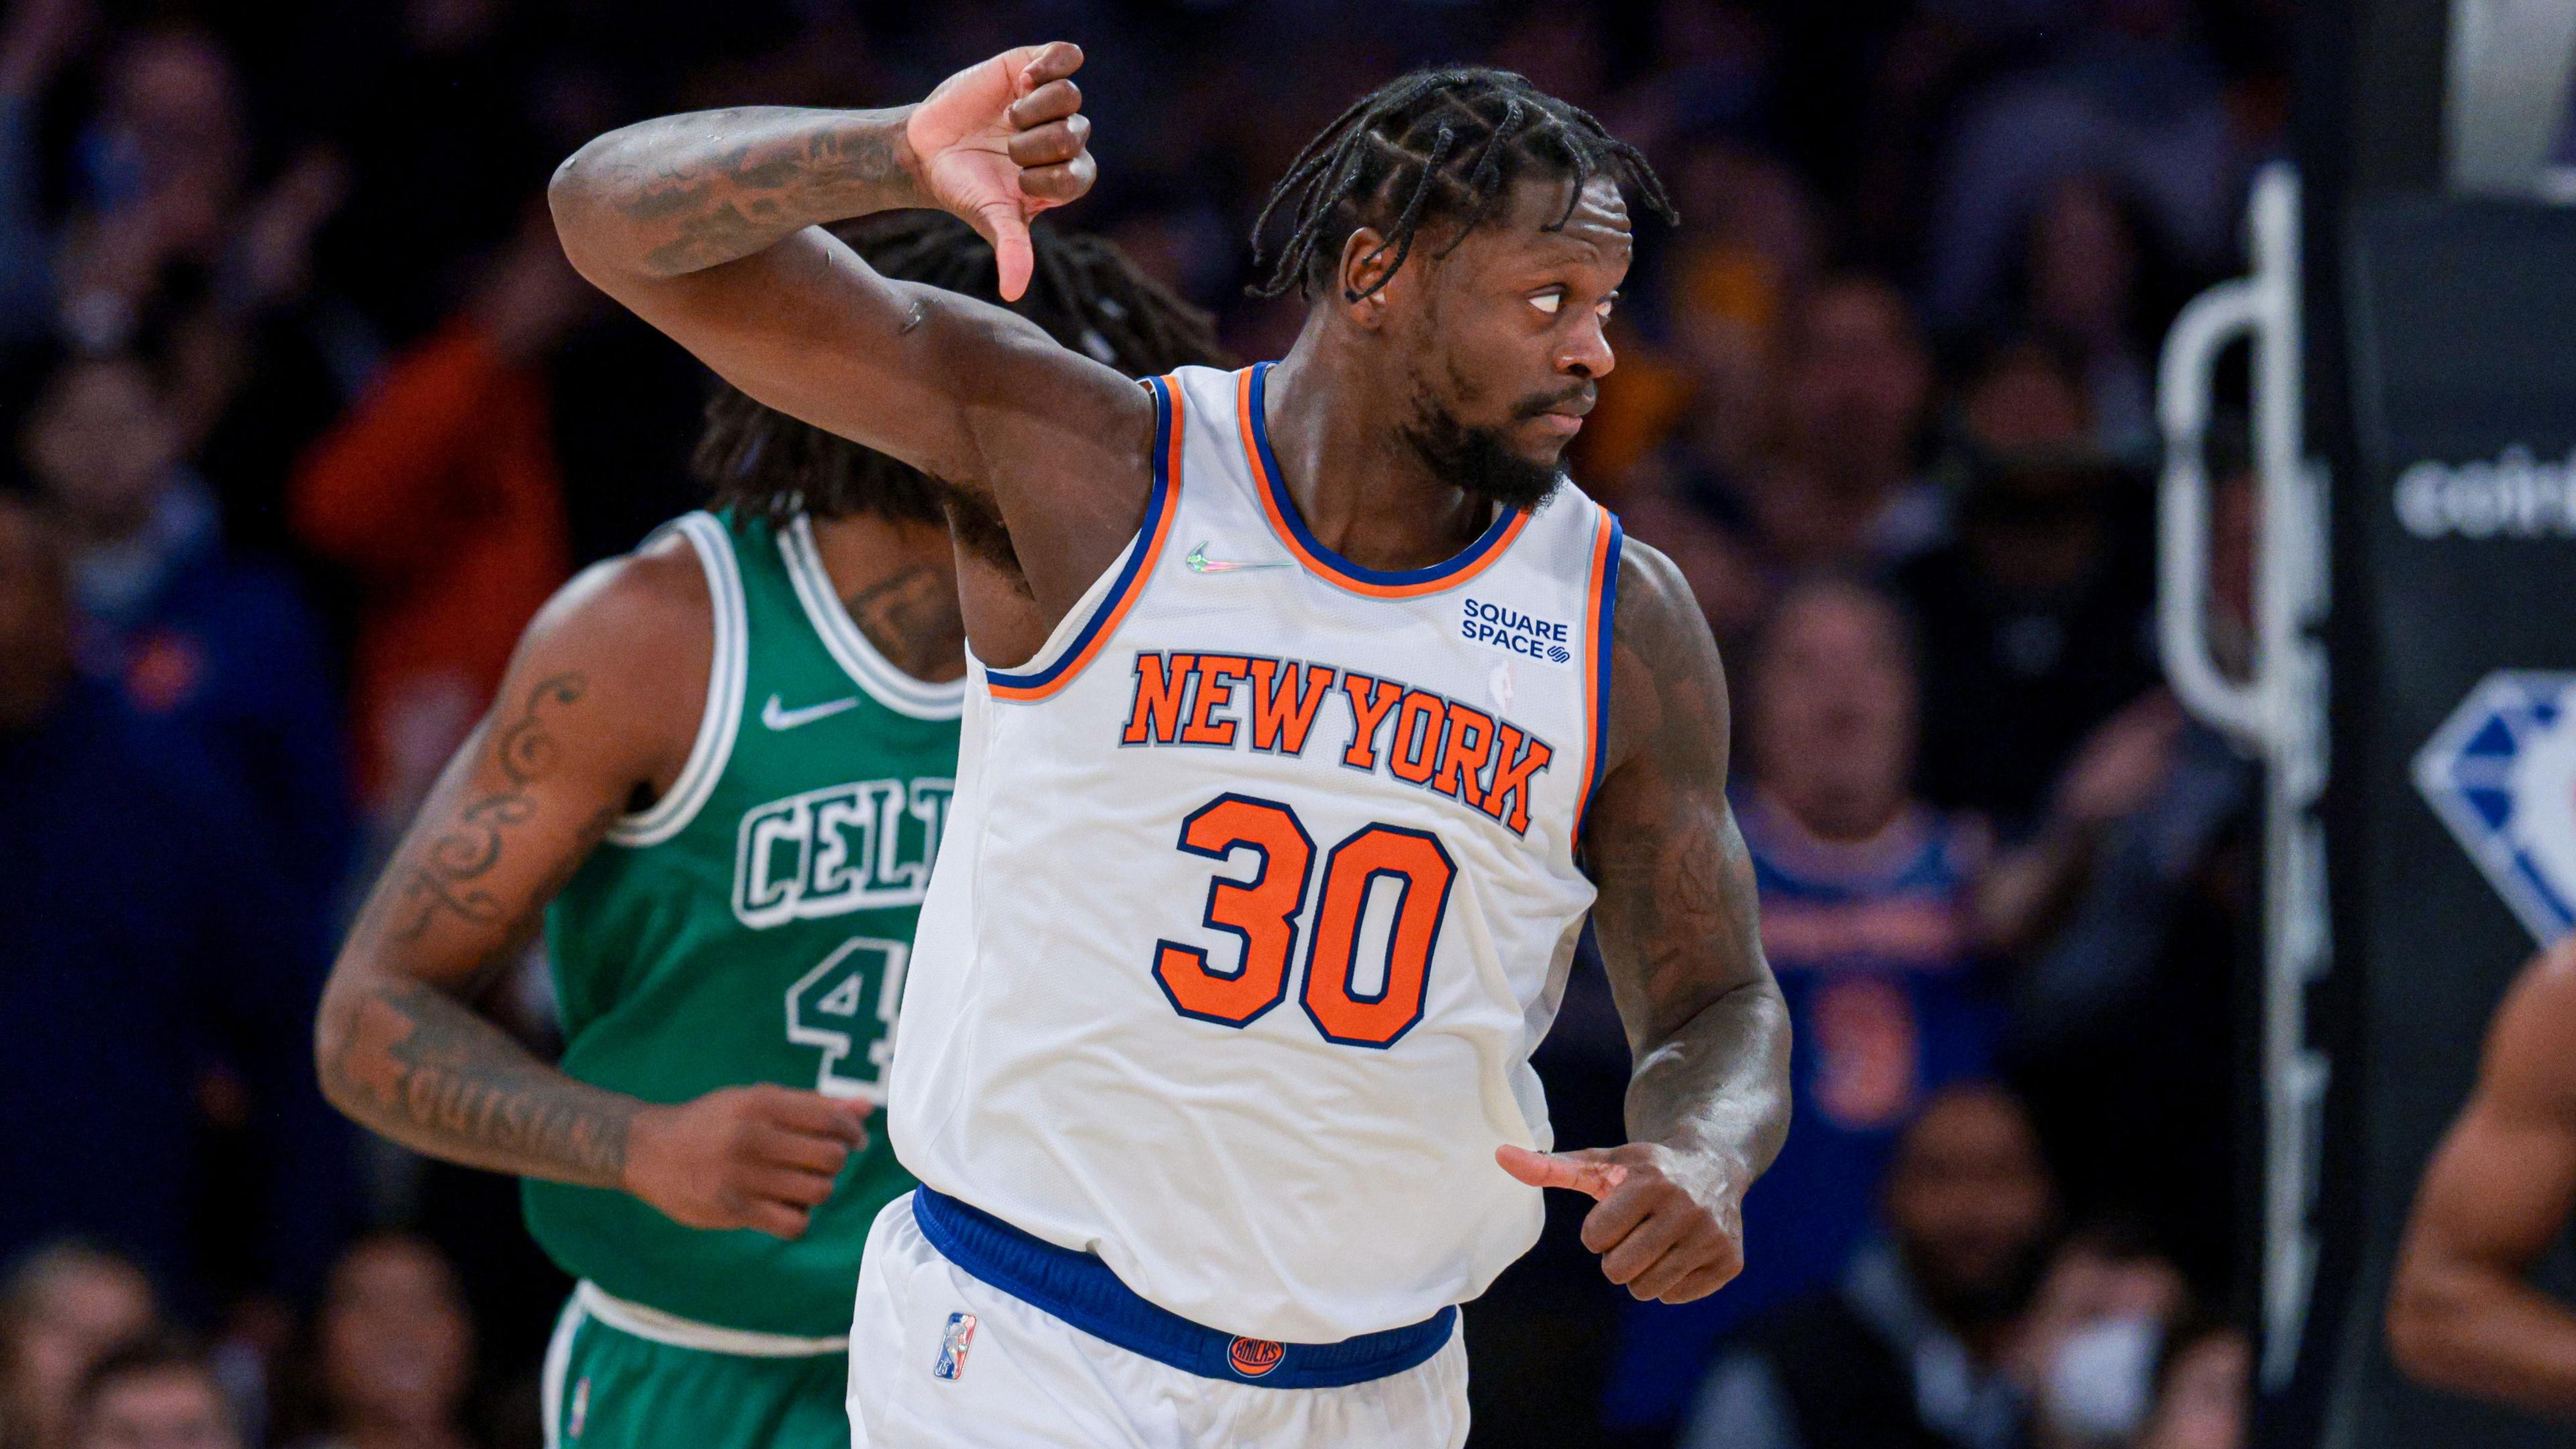 Jan 6, 2022; New York, New York, USA; New York Knicks forward Julius Randle (30) gestures after making a basket against the Boston Celtics during the second half at Madison Square Garden. / Vincent Carchietta-USA TODAY Sports